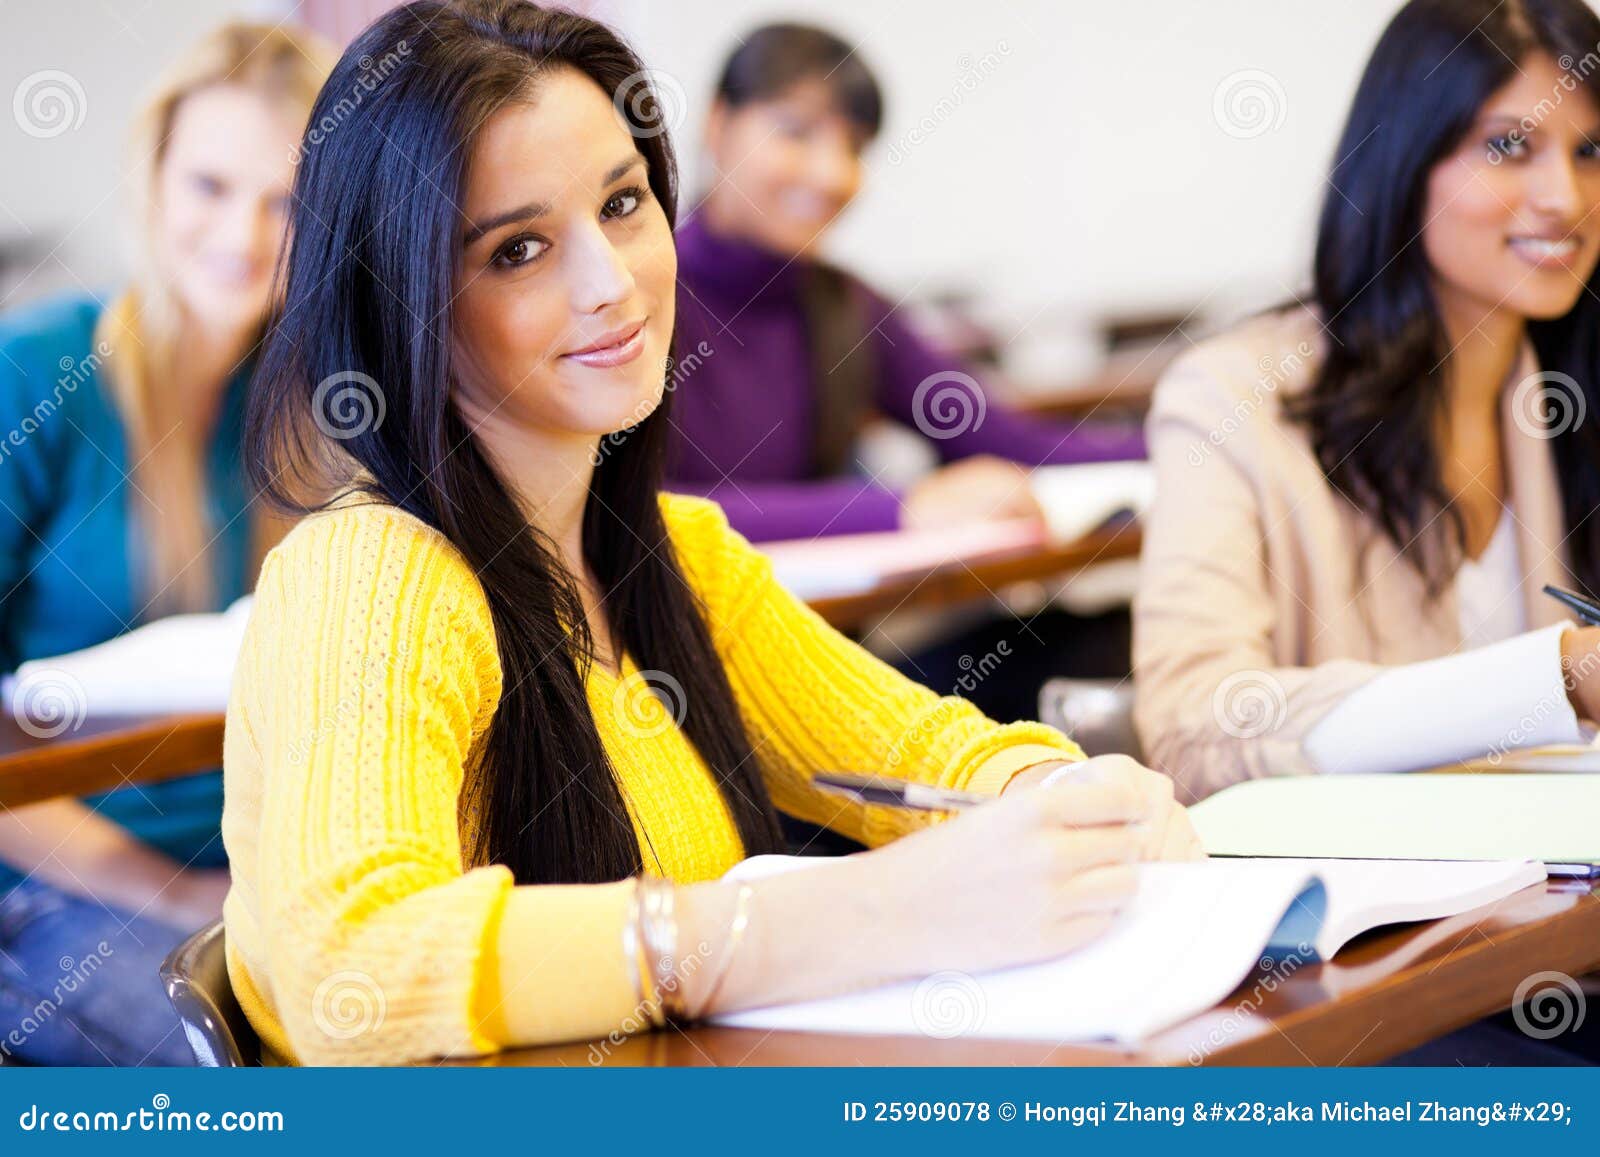 College Students In Classroom Royalty Free Stock Photos - Image: 25909078